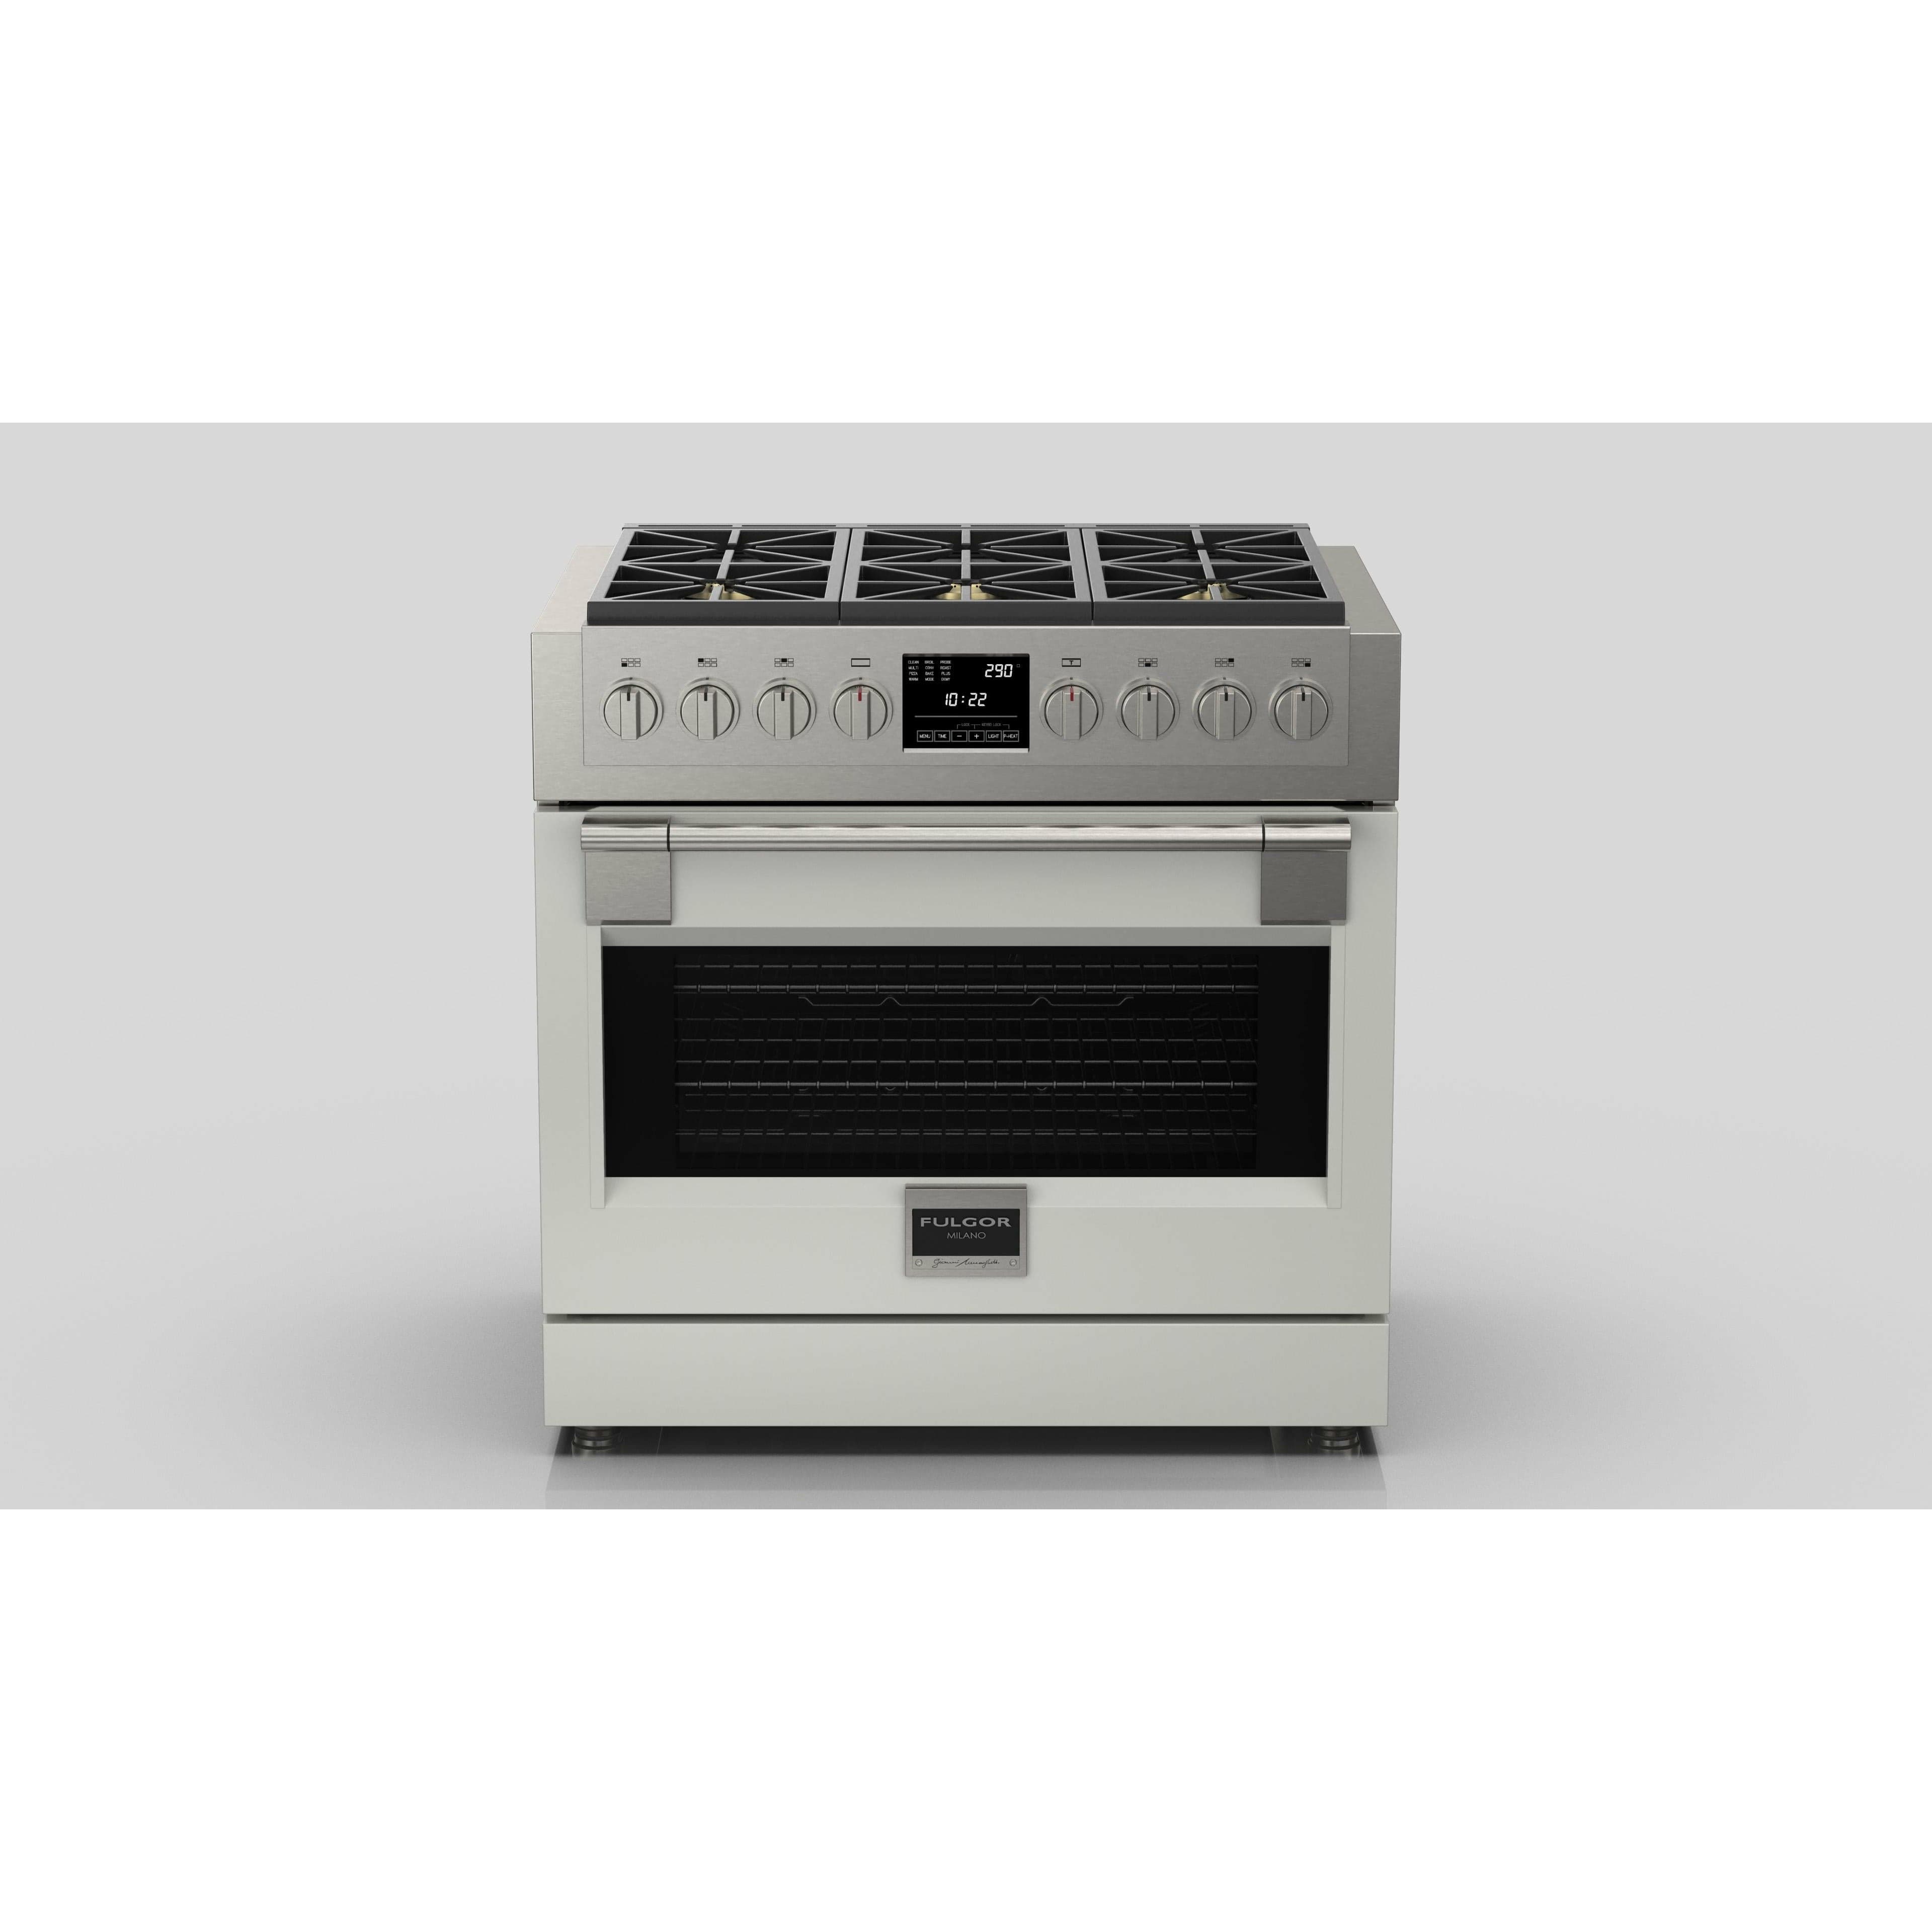 Fulgor Milano 36" Freestanding Dual Pro Fuel Range with Four 18,000 BTU Burners, Stainless Steel - F6PDF366S1 Ranges PDRKIT36WH Luxury Appliances Direct